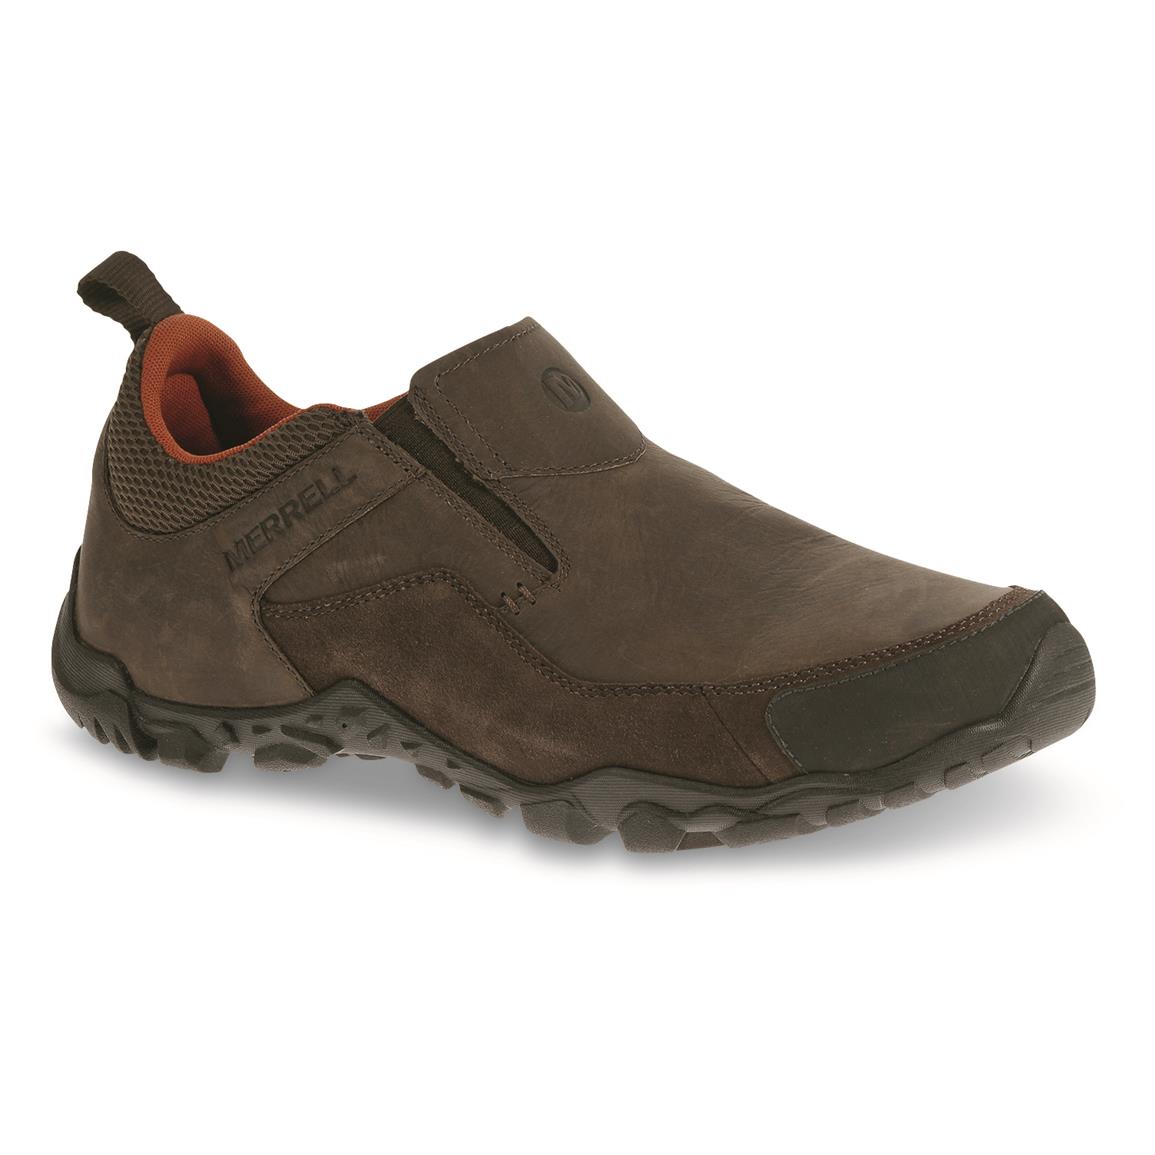 Merrell Men's Telluride Moc Shoes - 689515, Casual Shoes at Sportsman's ...